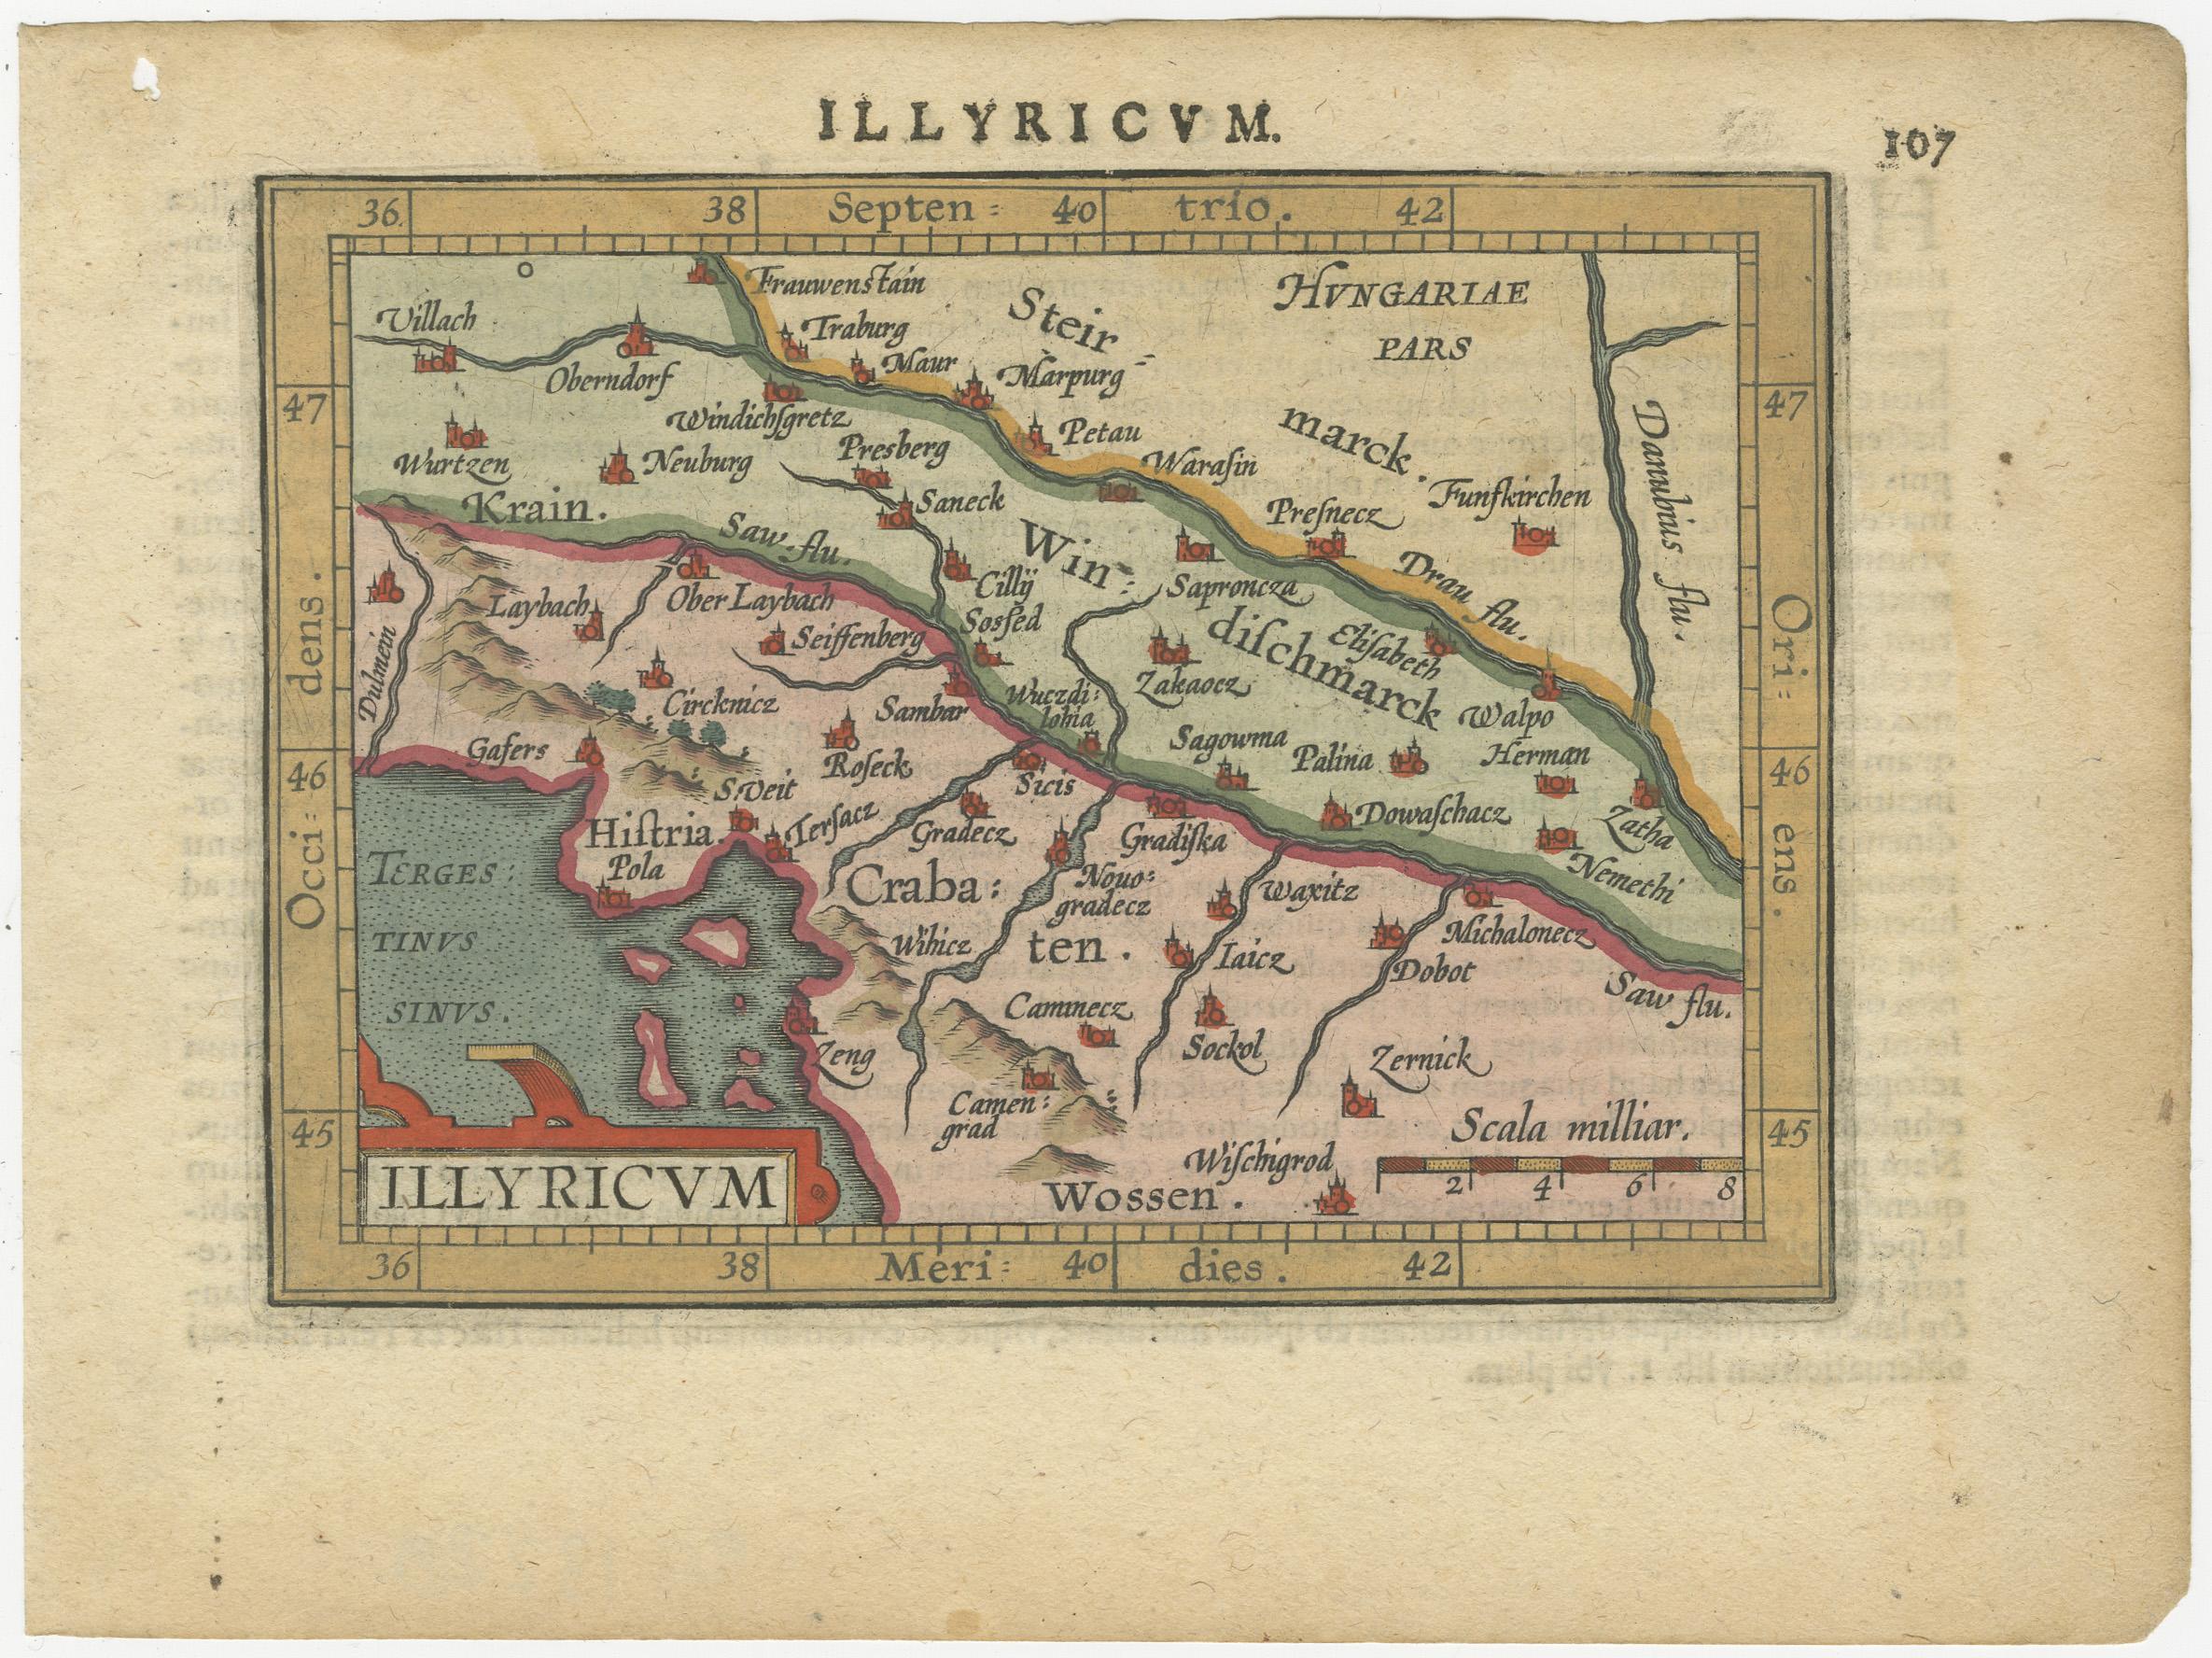 Antique miniature map titled 'Illyricum'. Original small map of Illyricum. The Roman province of Illyricum stretched from the Drilon River (the Drin, in modern Albania) in the south to Istria (modern Slovenia and Croatia) in the north and to the